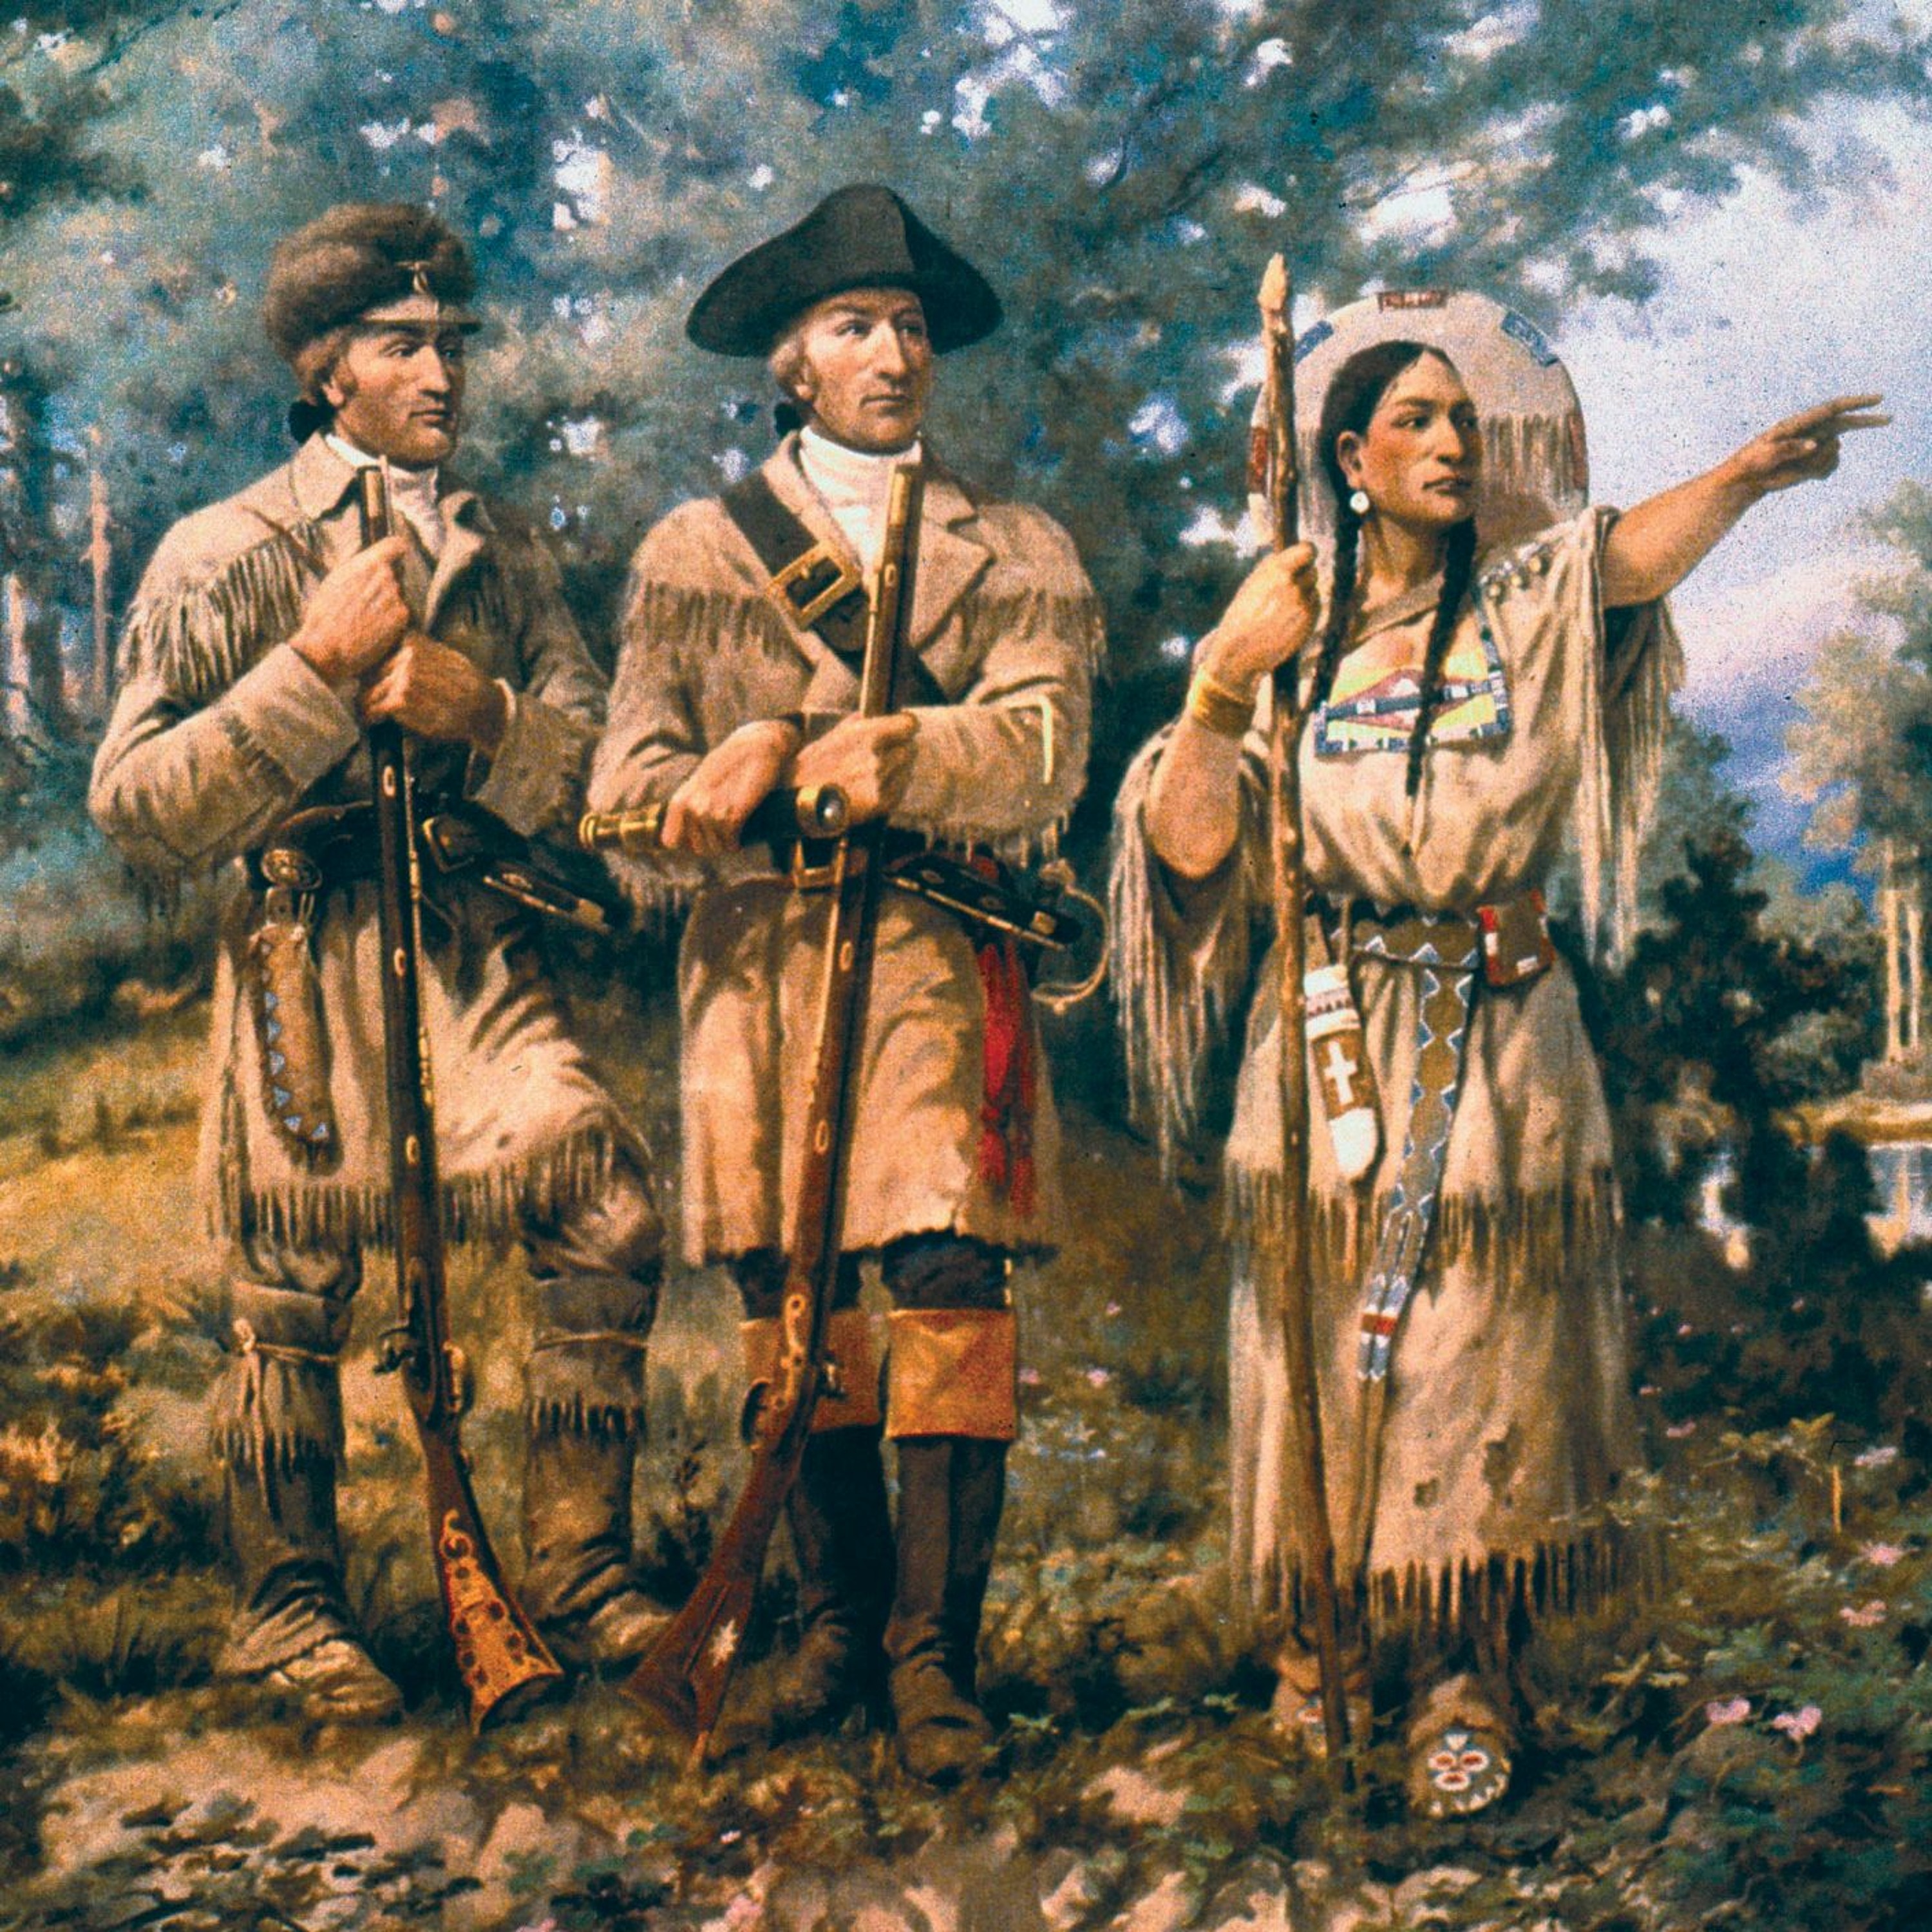 #12 Lewis and Clark